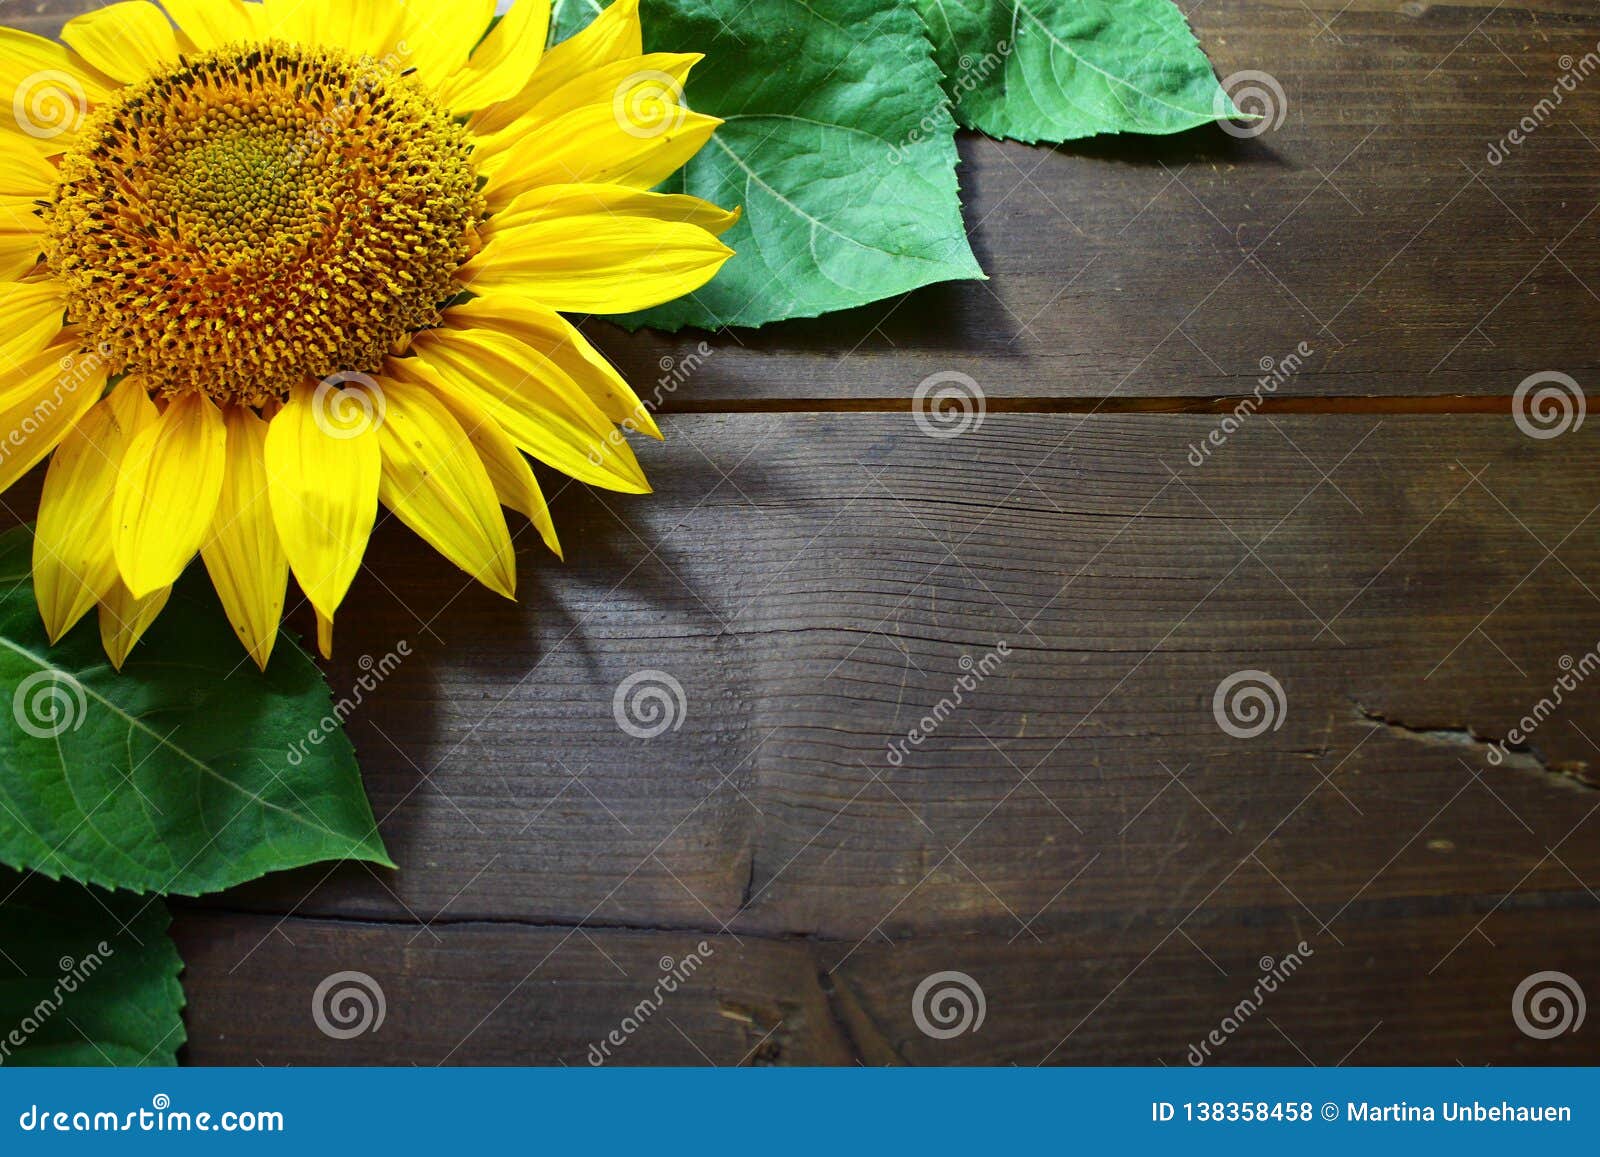 Border with a sunflower stock photo. Image of brown - 138358458